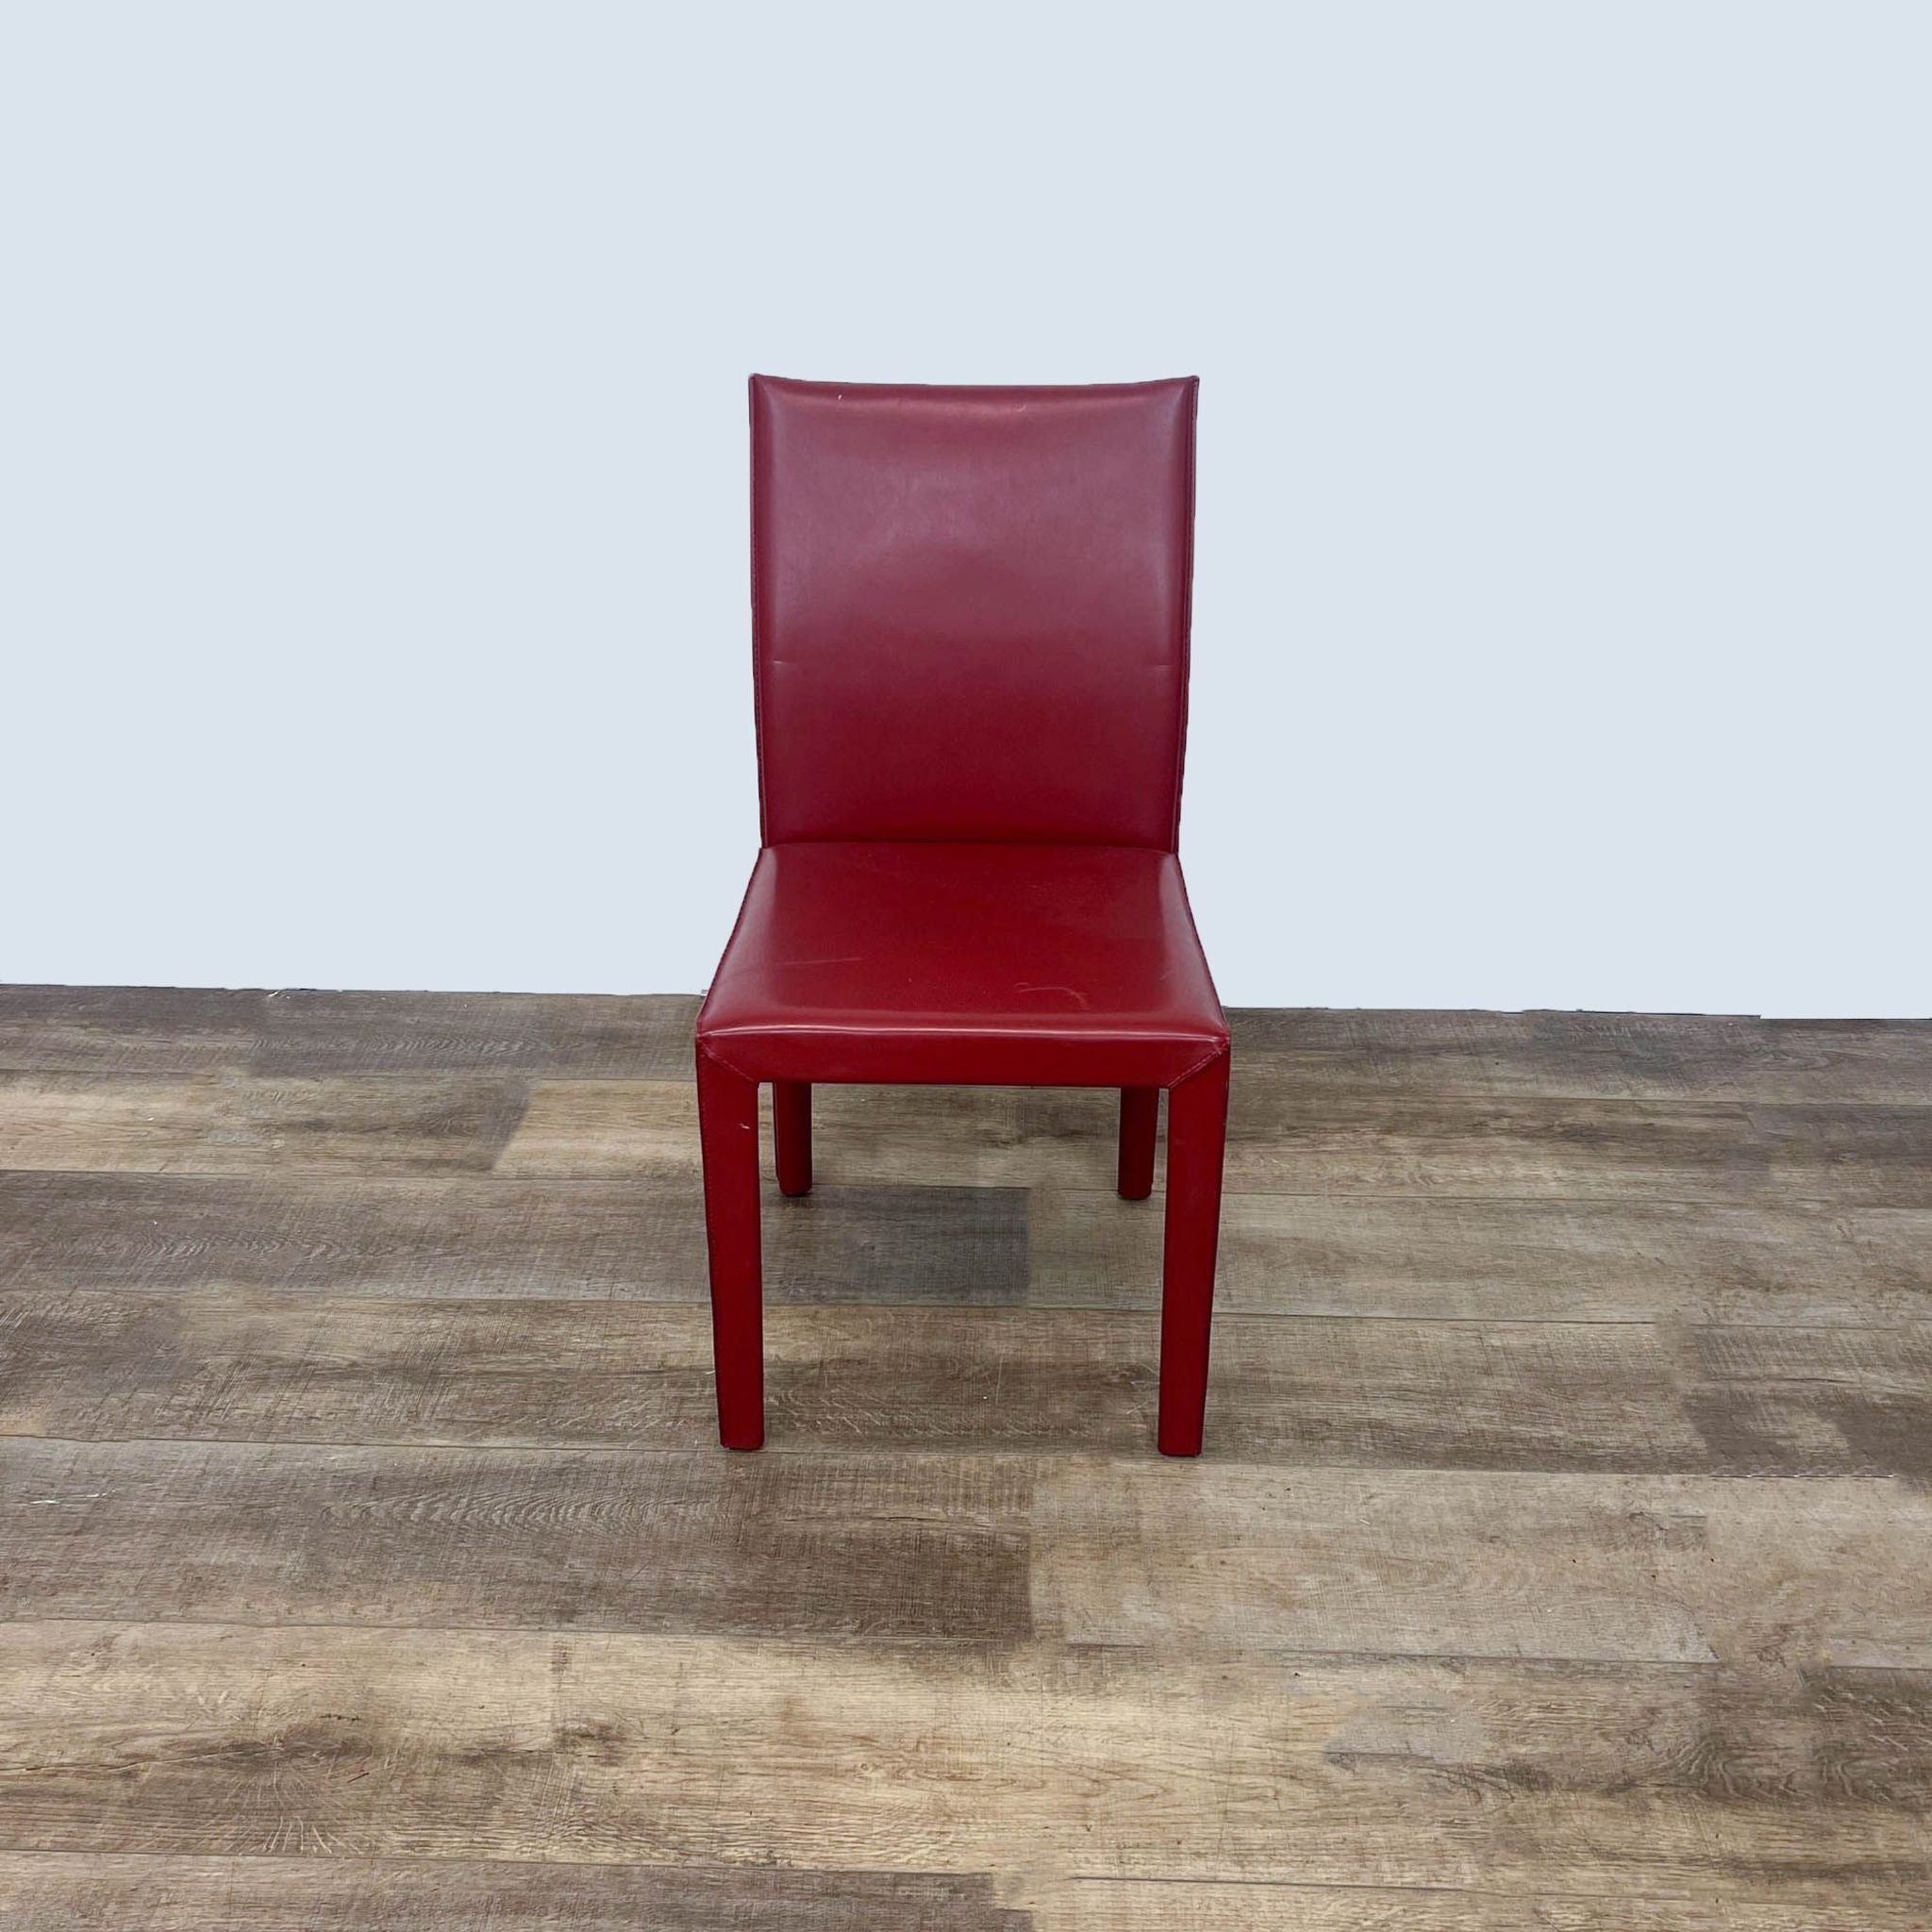 1. Maria Yee modern red leather dining chair with curved back on wooden floor.